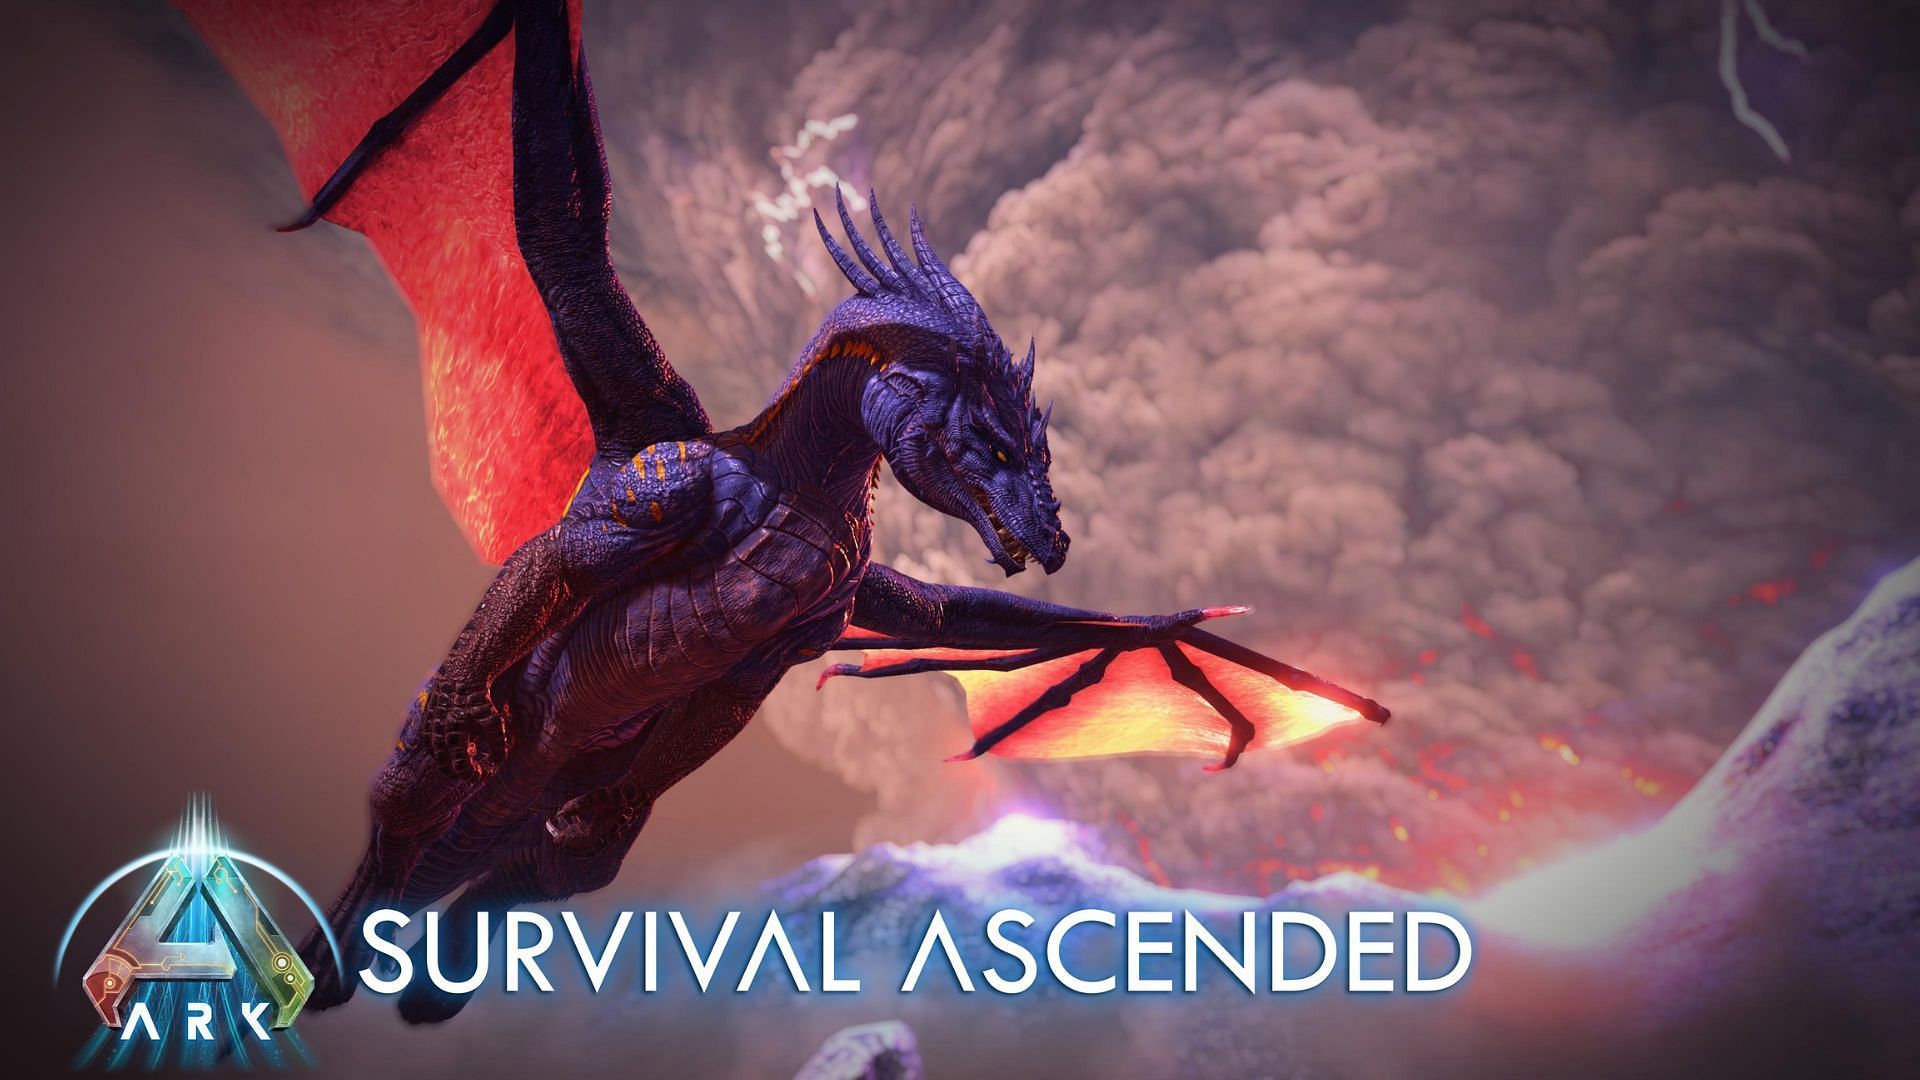 Dragon is an extremely powerful boss that can use AoE attacks (Image via Studio Wildcard)